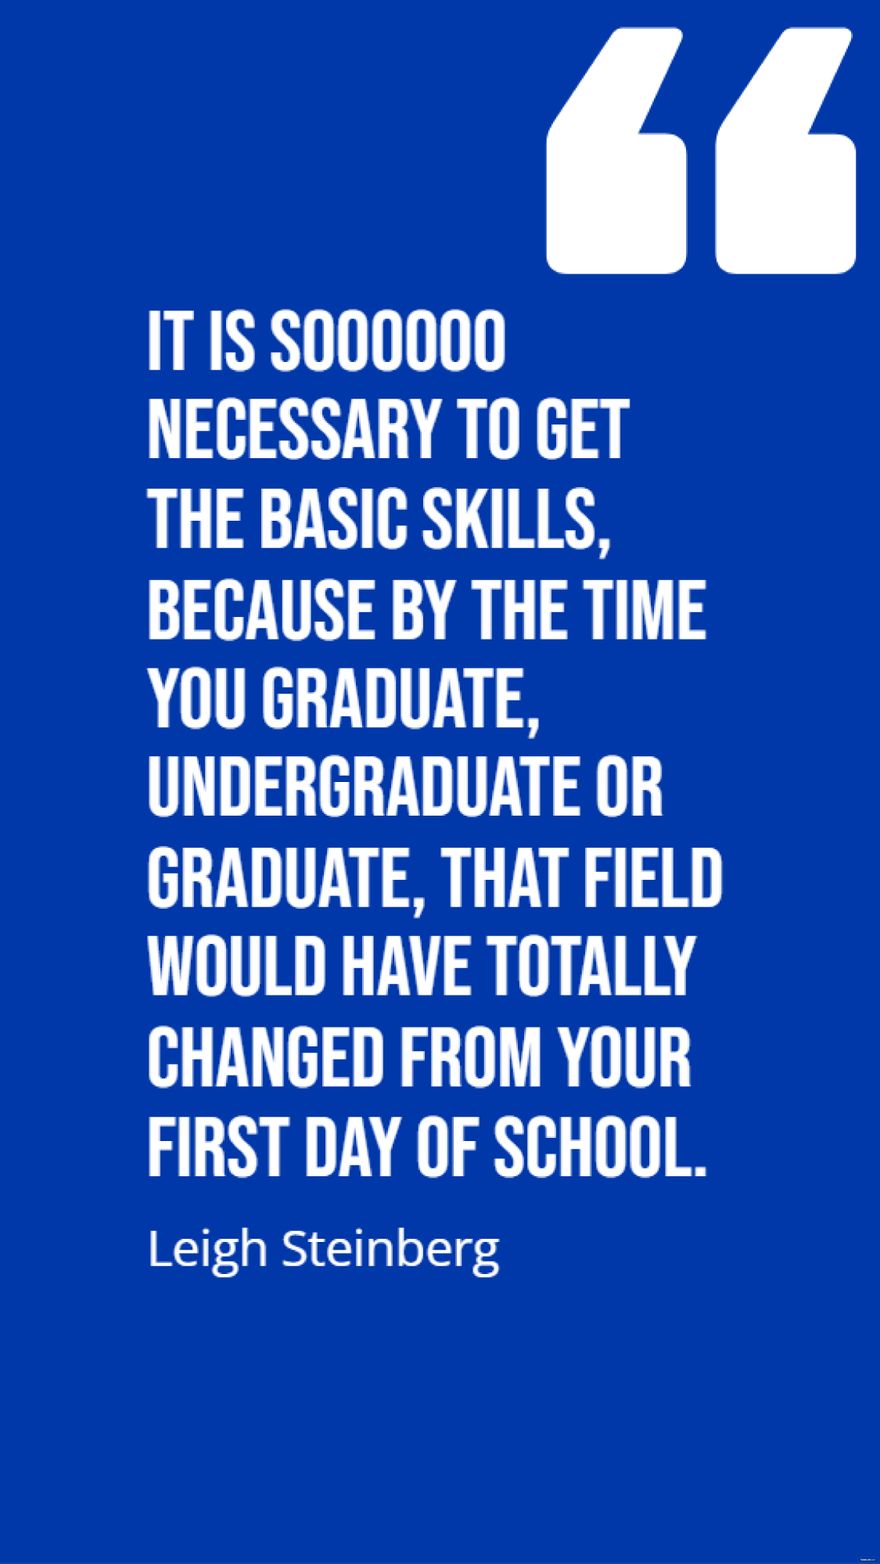 Free Leigh Steinberg - It is soooooo necessary to get the basic skills, because by the time you graduate, undergraduate or graduate, that field would have totally changed from your first day of school.